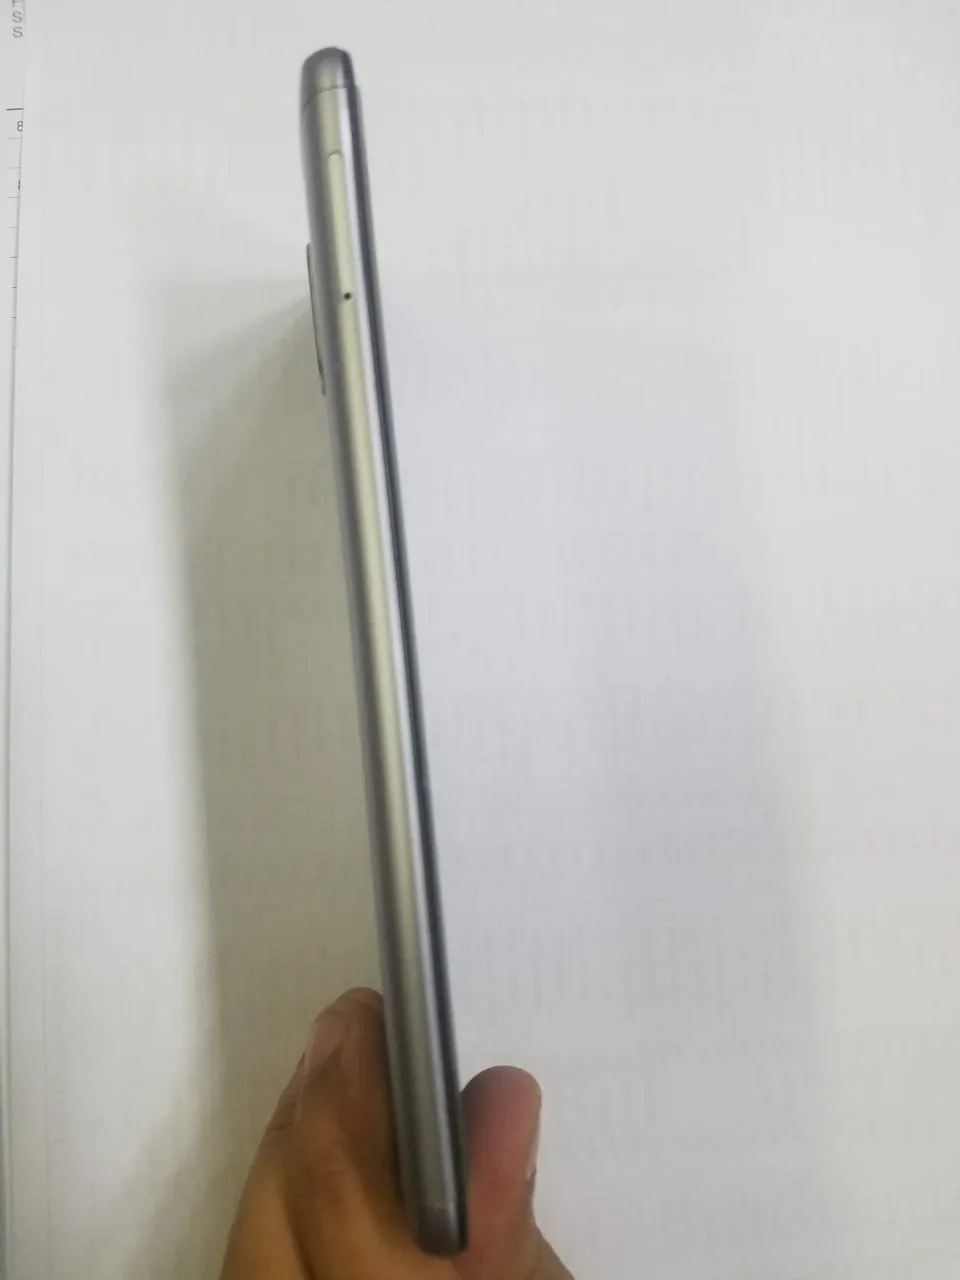 honor 6x gaurnteed non repaired condition 10/10 - photo 3